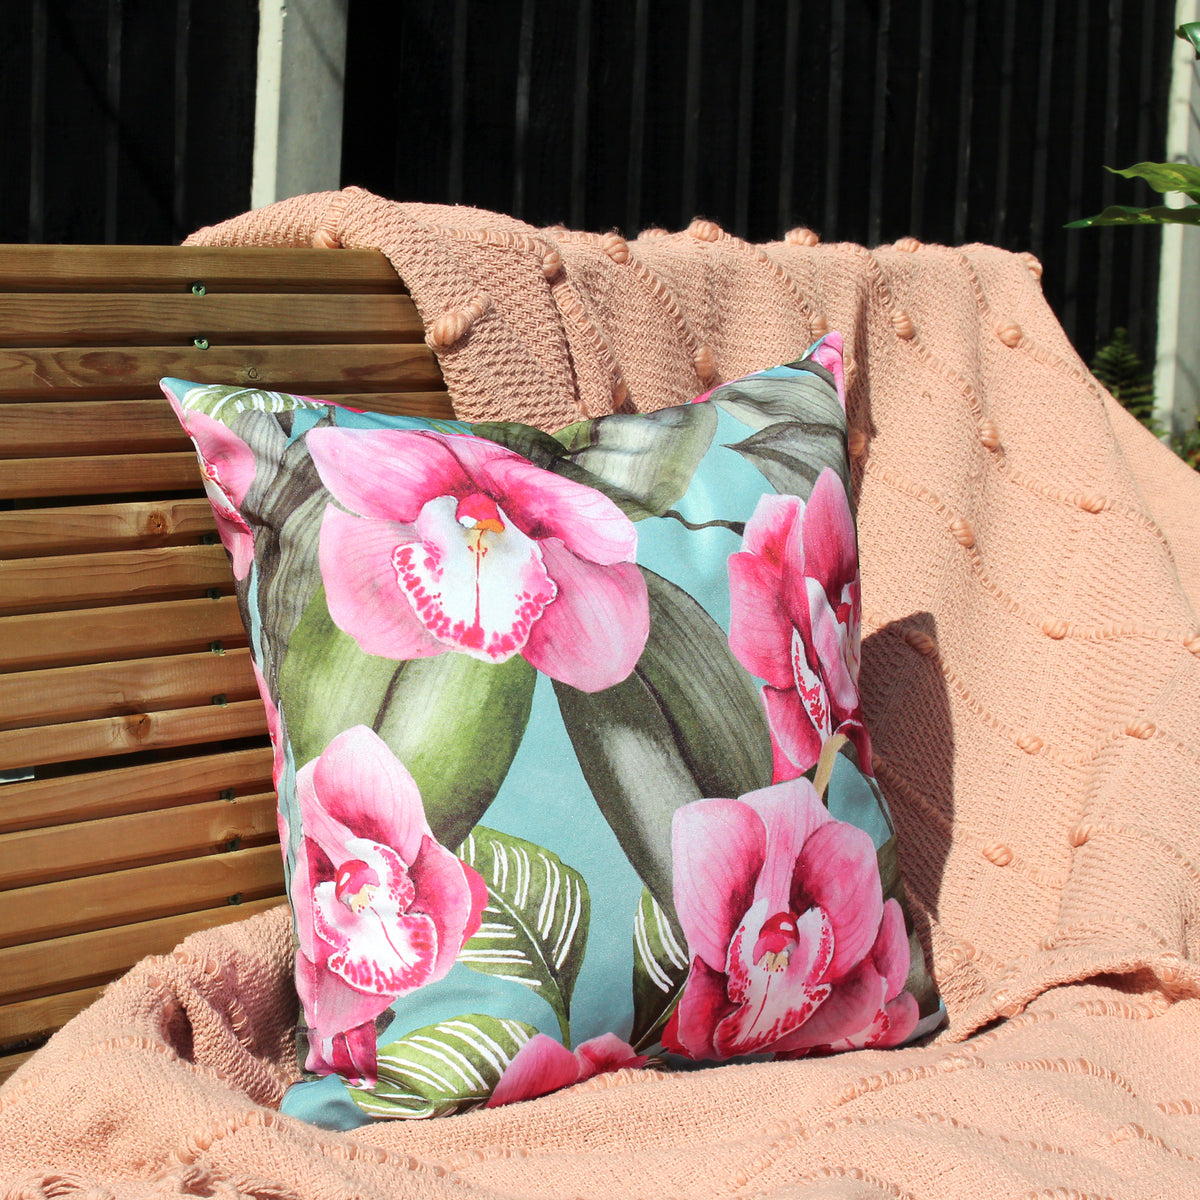 Orchids 43cm Reversible Outdoor Polyester Cushion